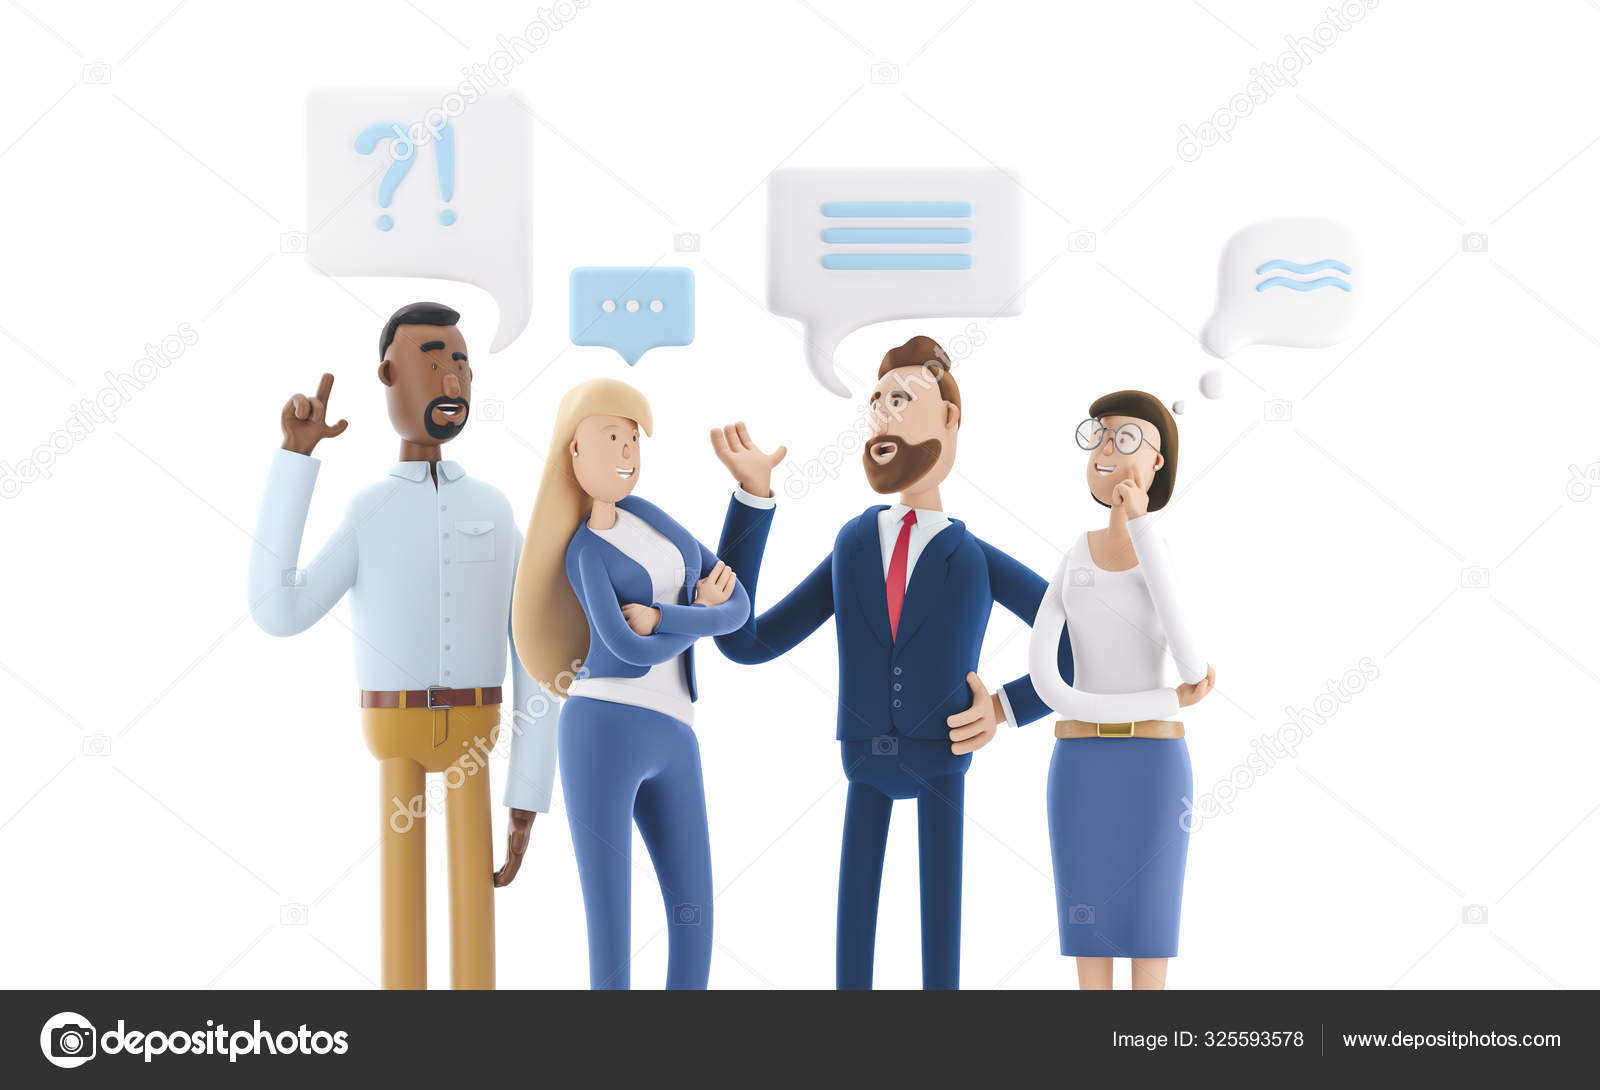 Different groups of people. Concept 3D illustration Stock Illustration